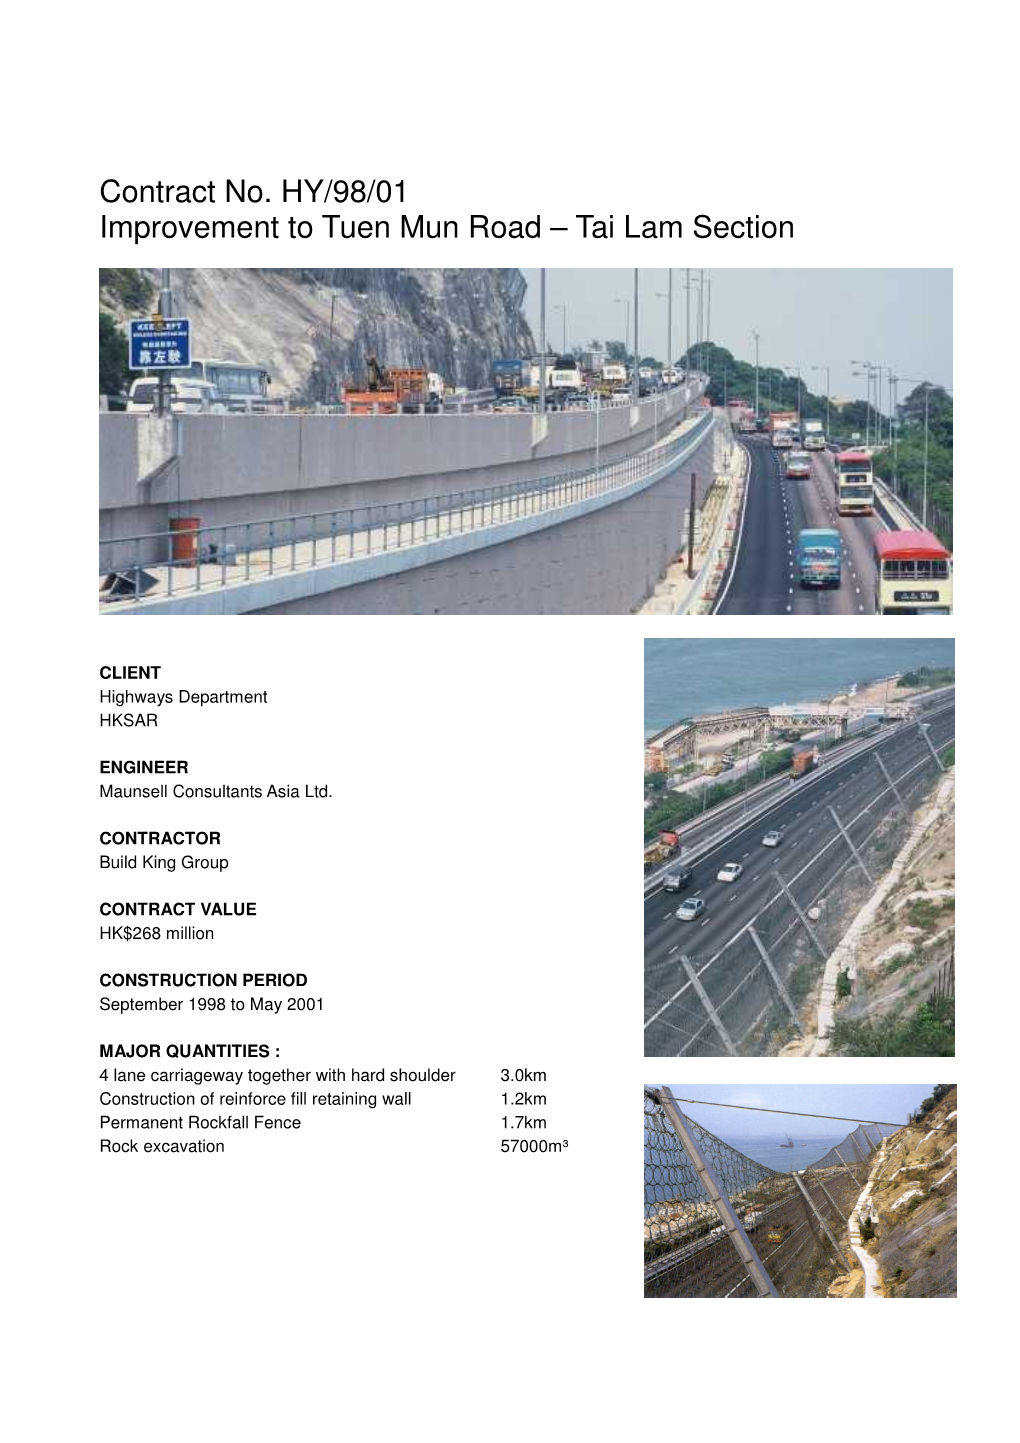 Contract No. HY/98/01 Improvement to Tuen Mun Road – Tai Lam Section